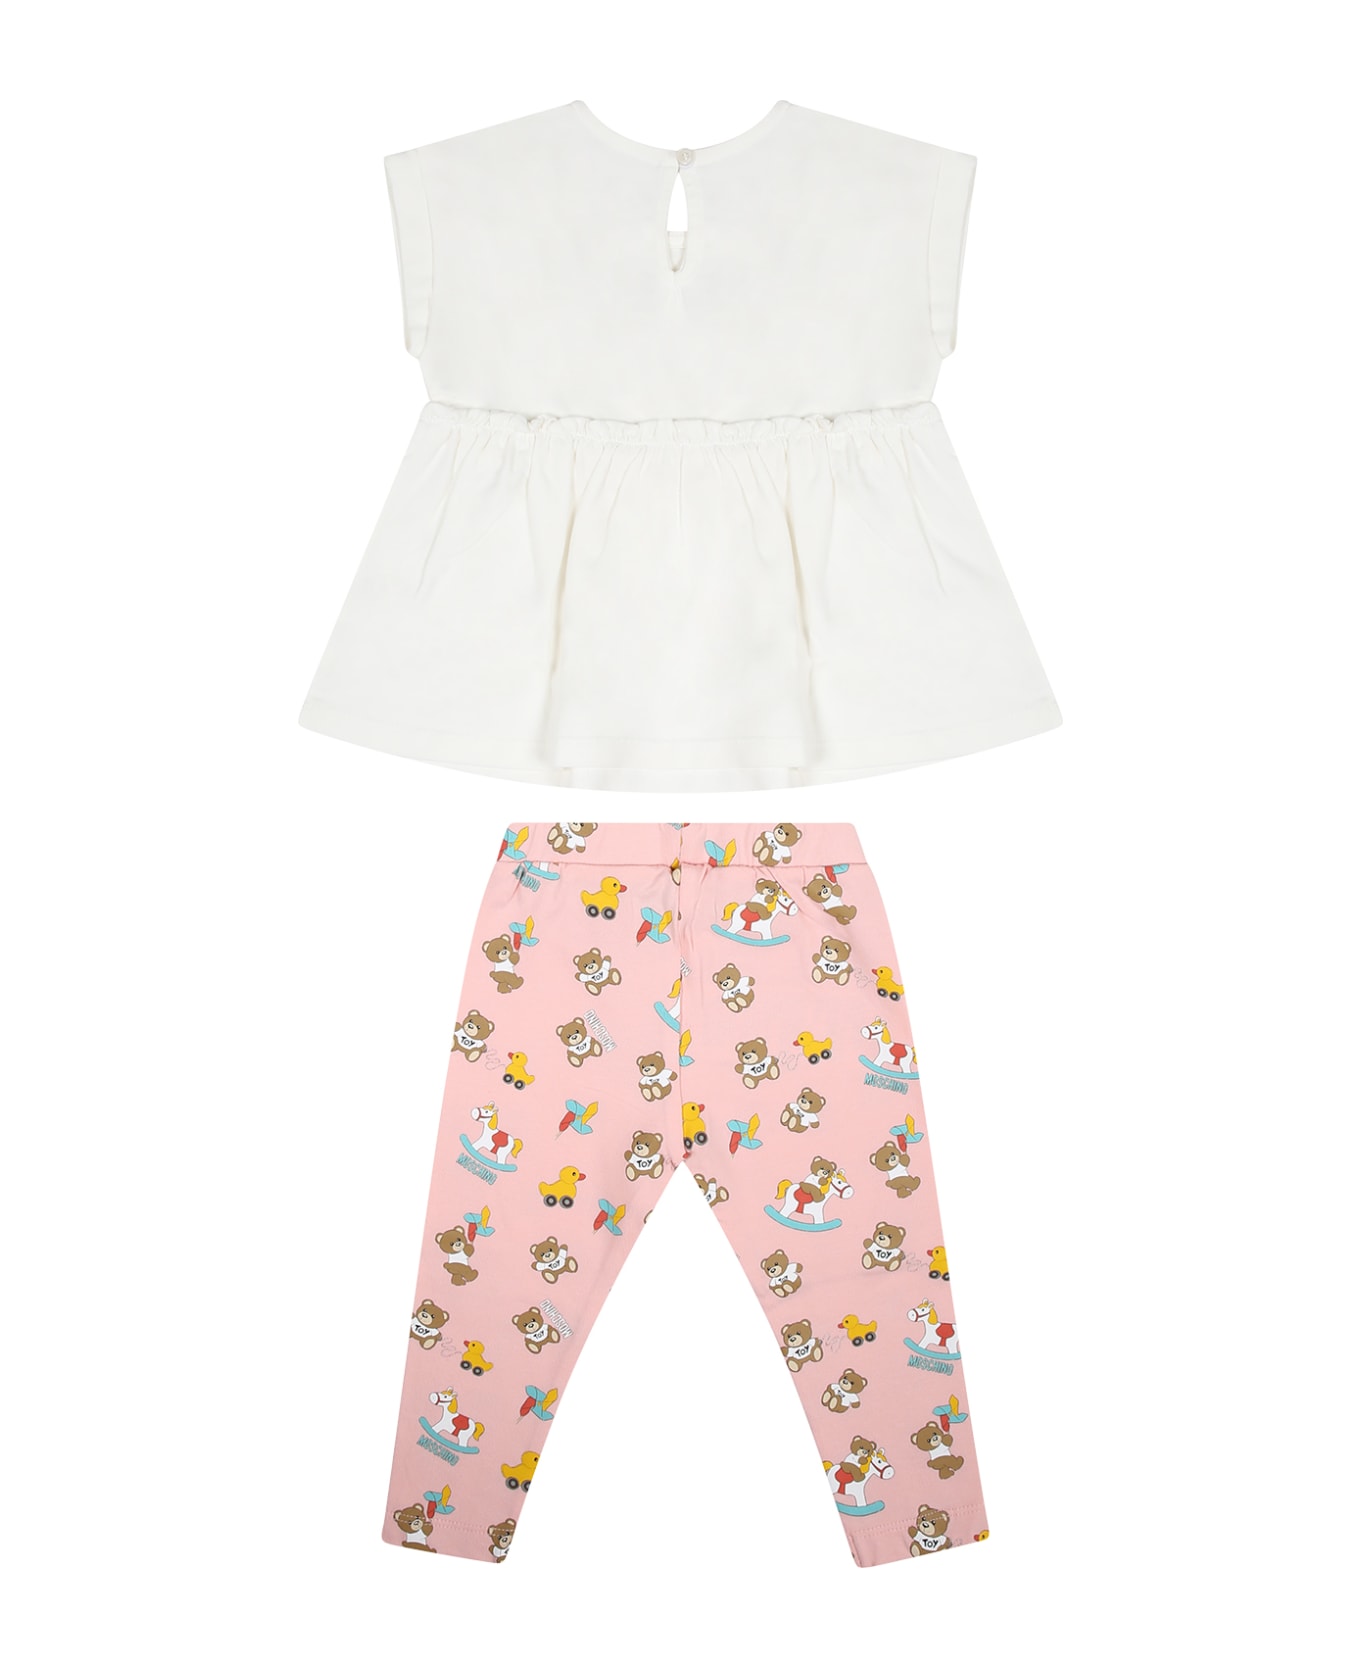 Moschino Multicolor Set For Baby Girl With Teddy Bear And Ducks - PINK/WHITE